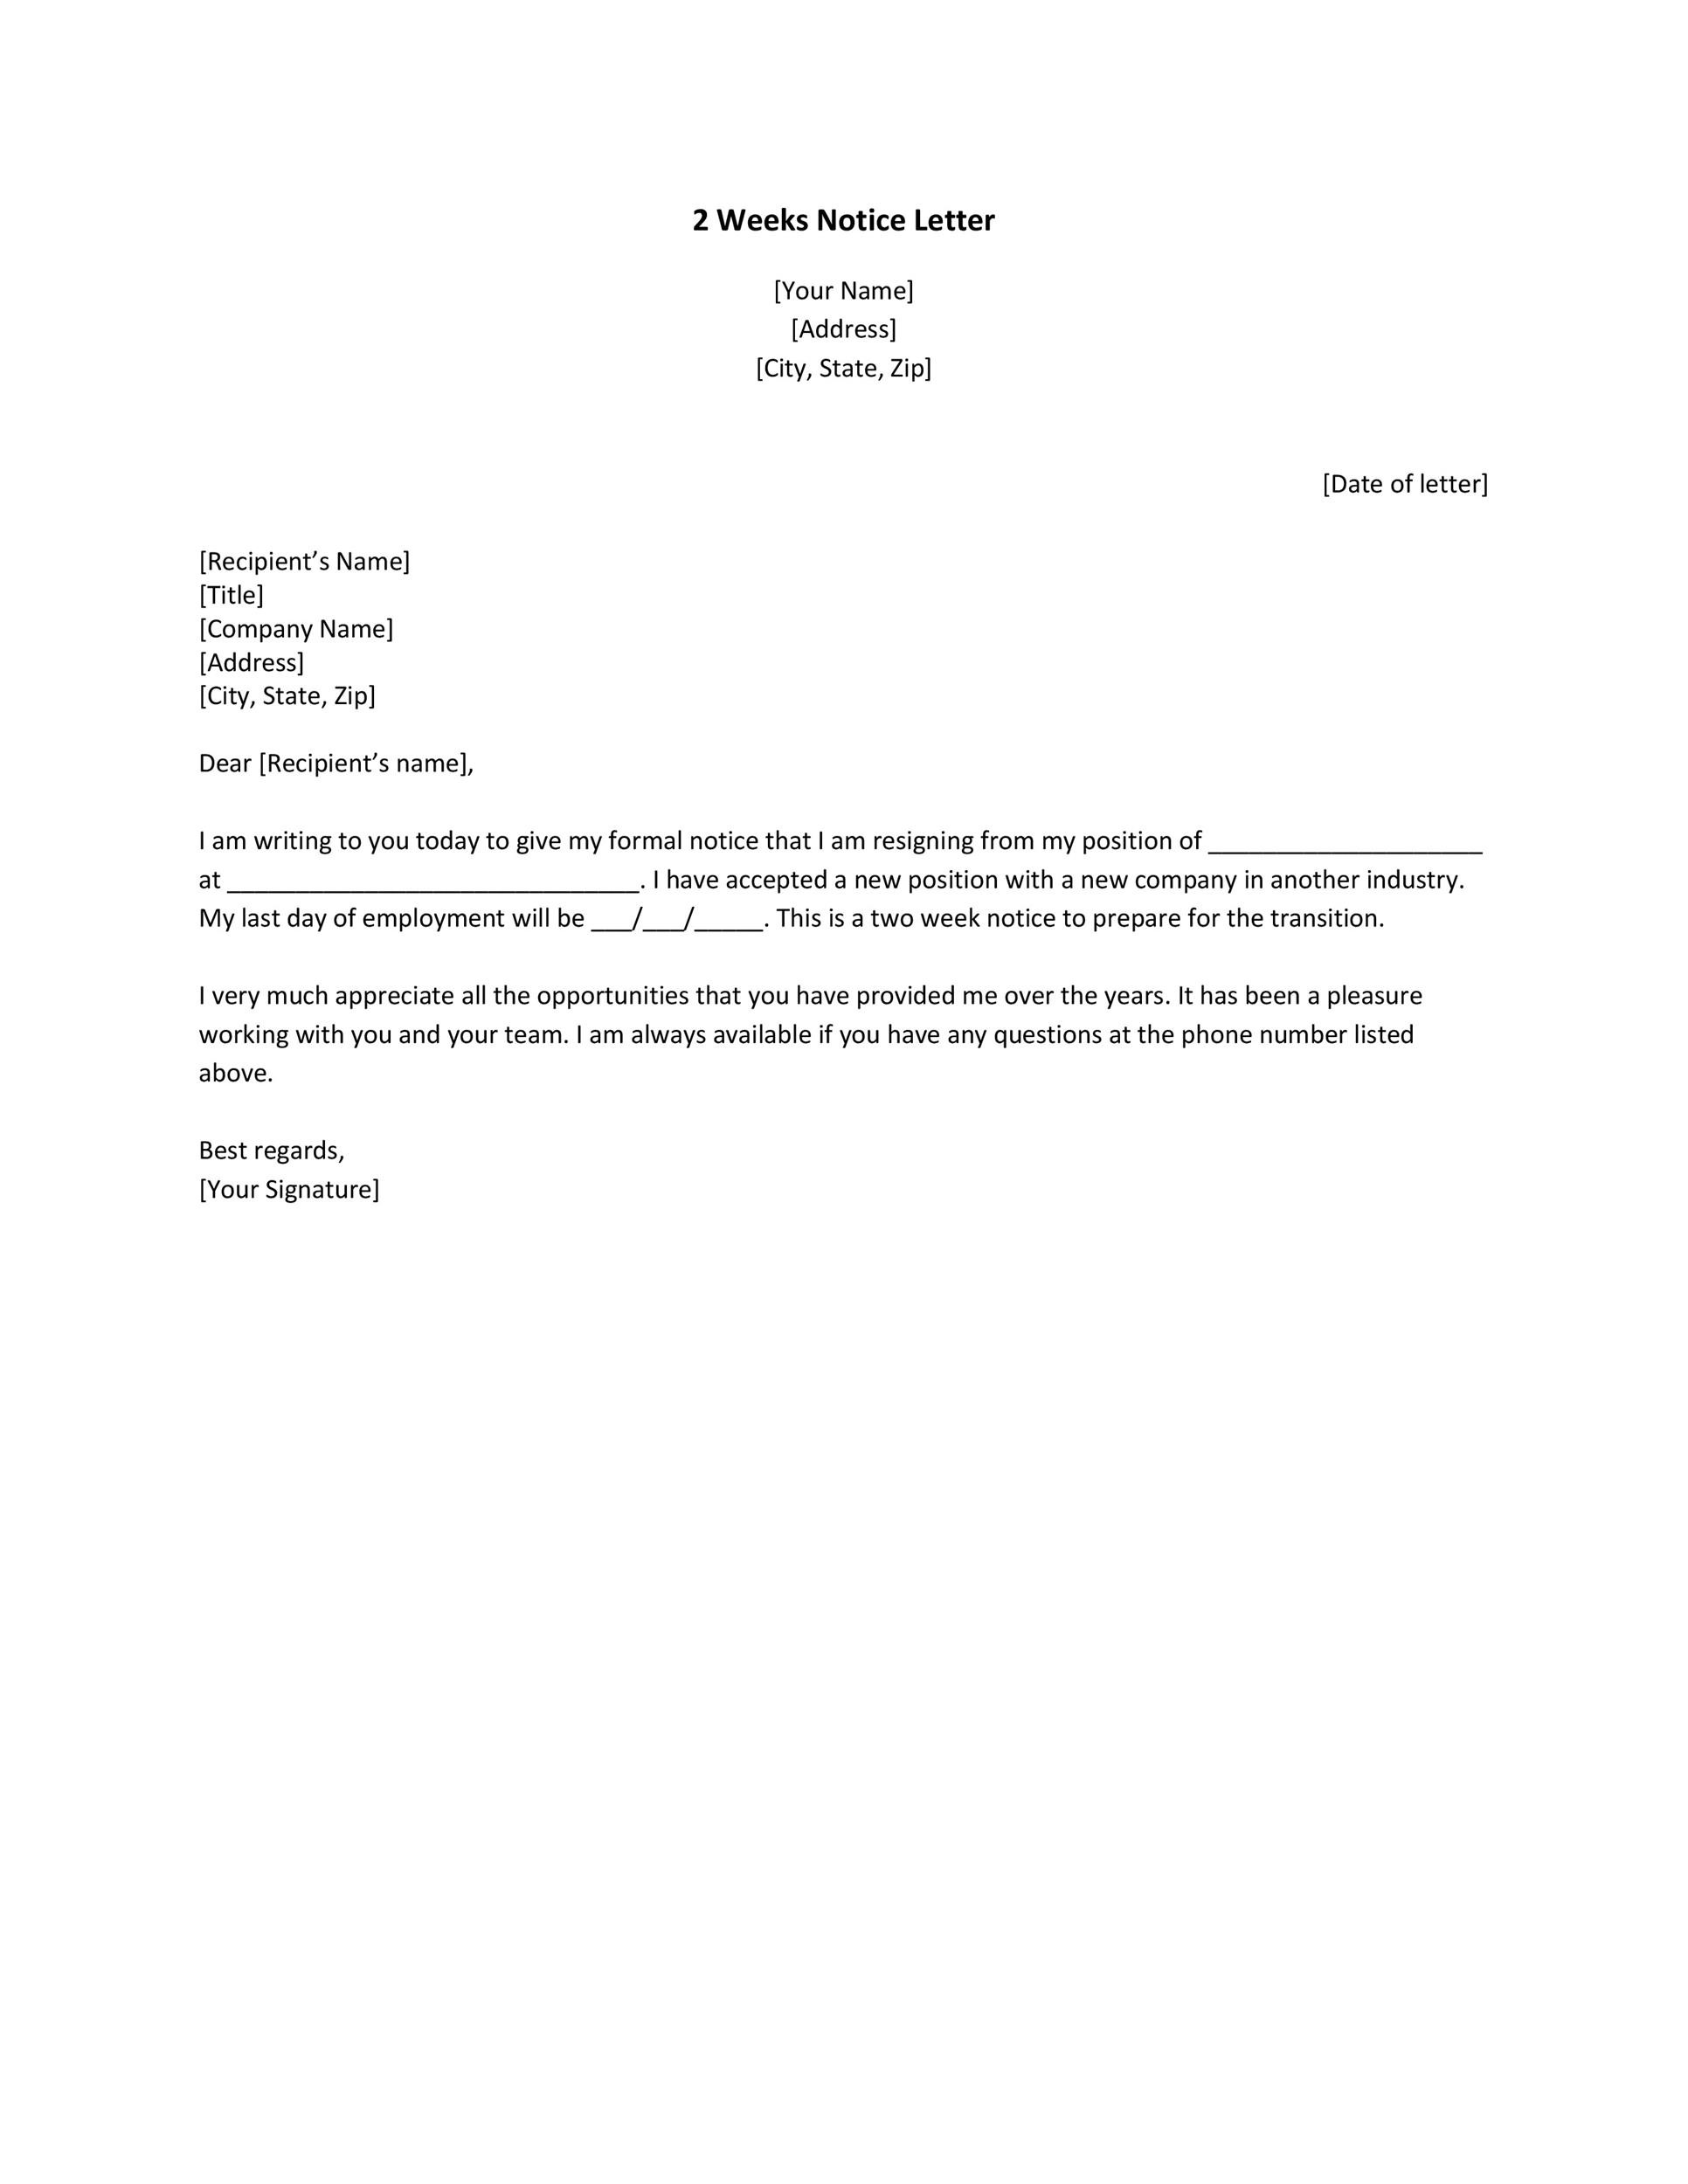 21 Two Weeks Notice Letters & Resignation Letter Templates